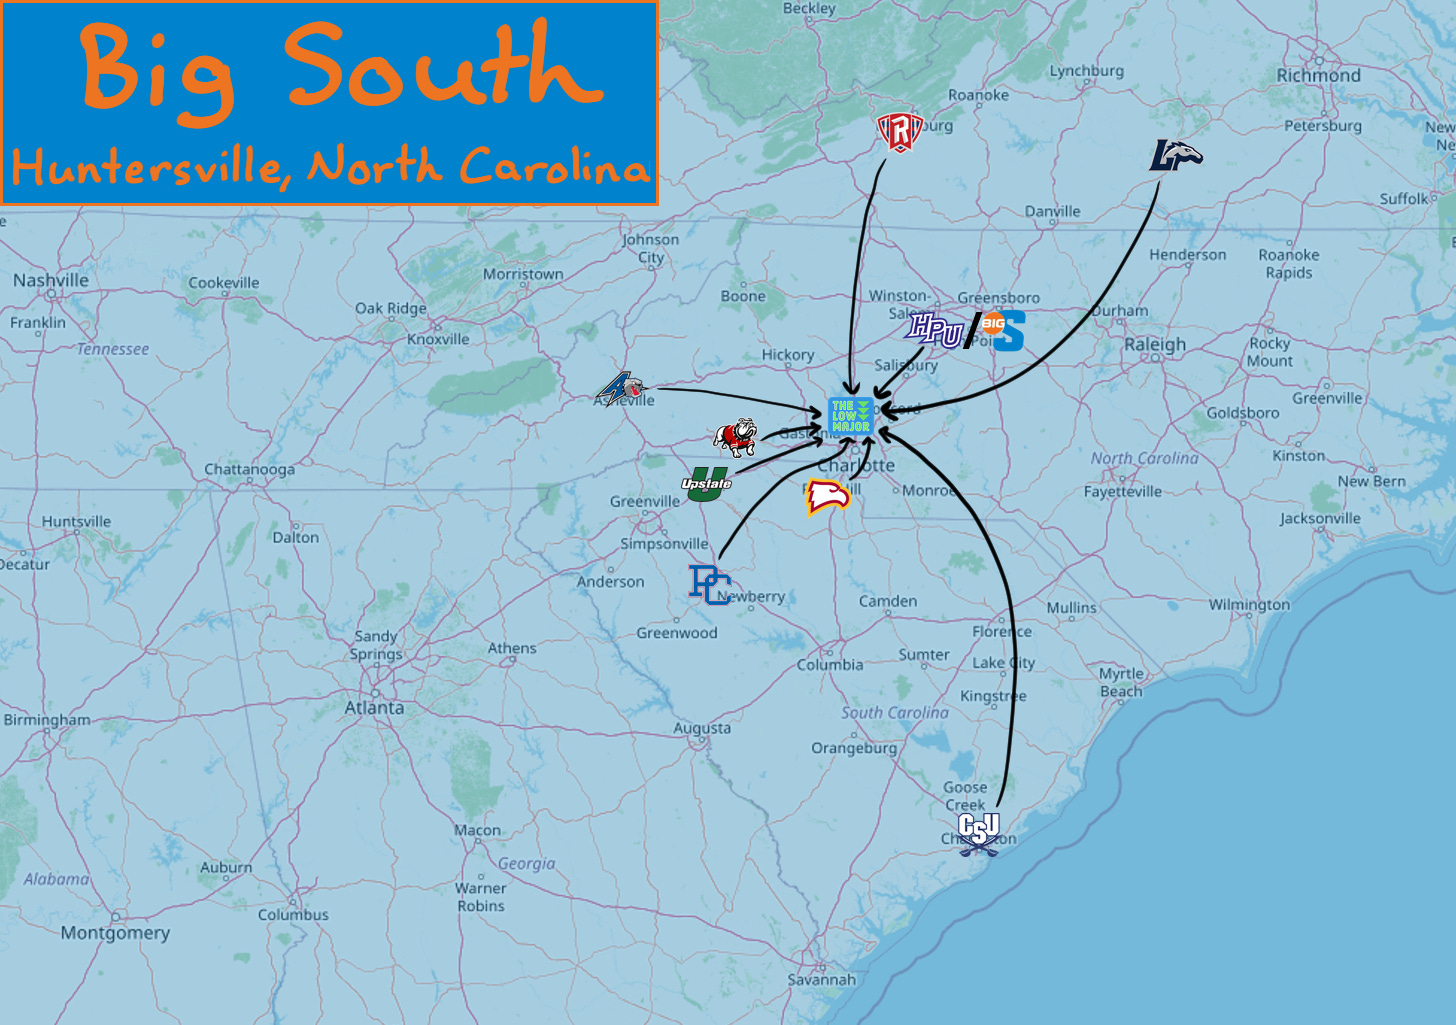 Big South midpoint map